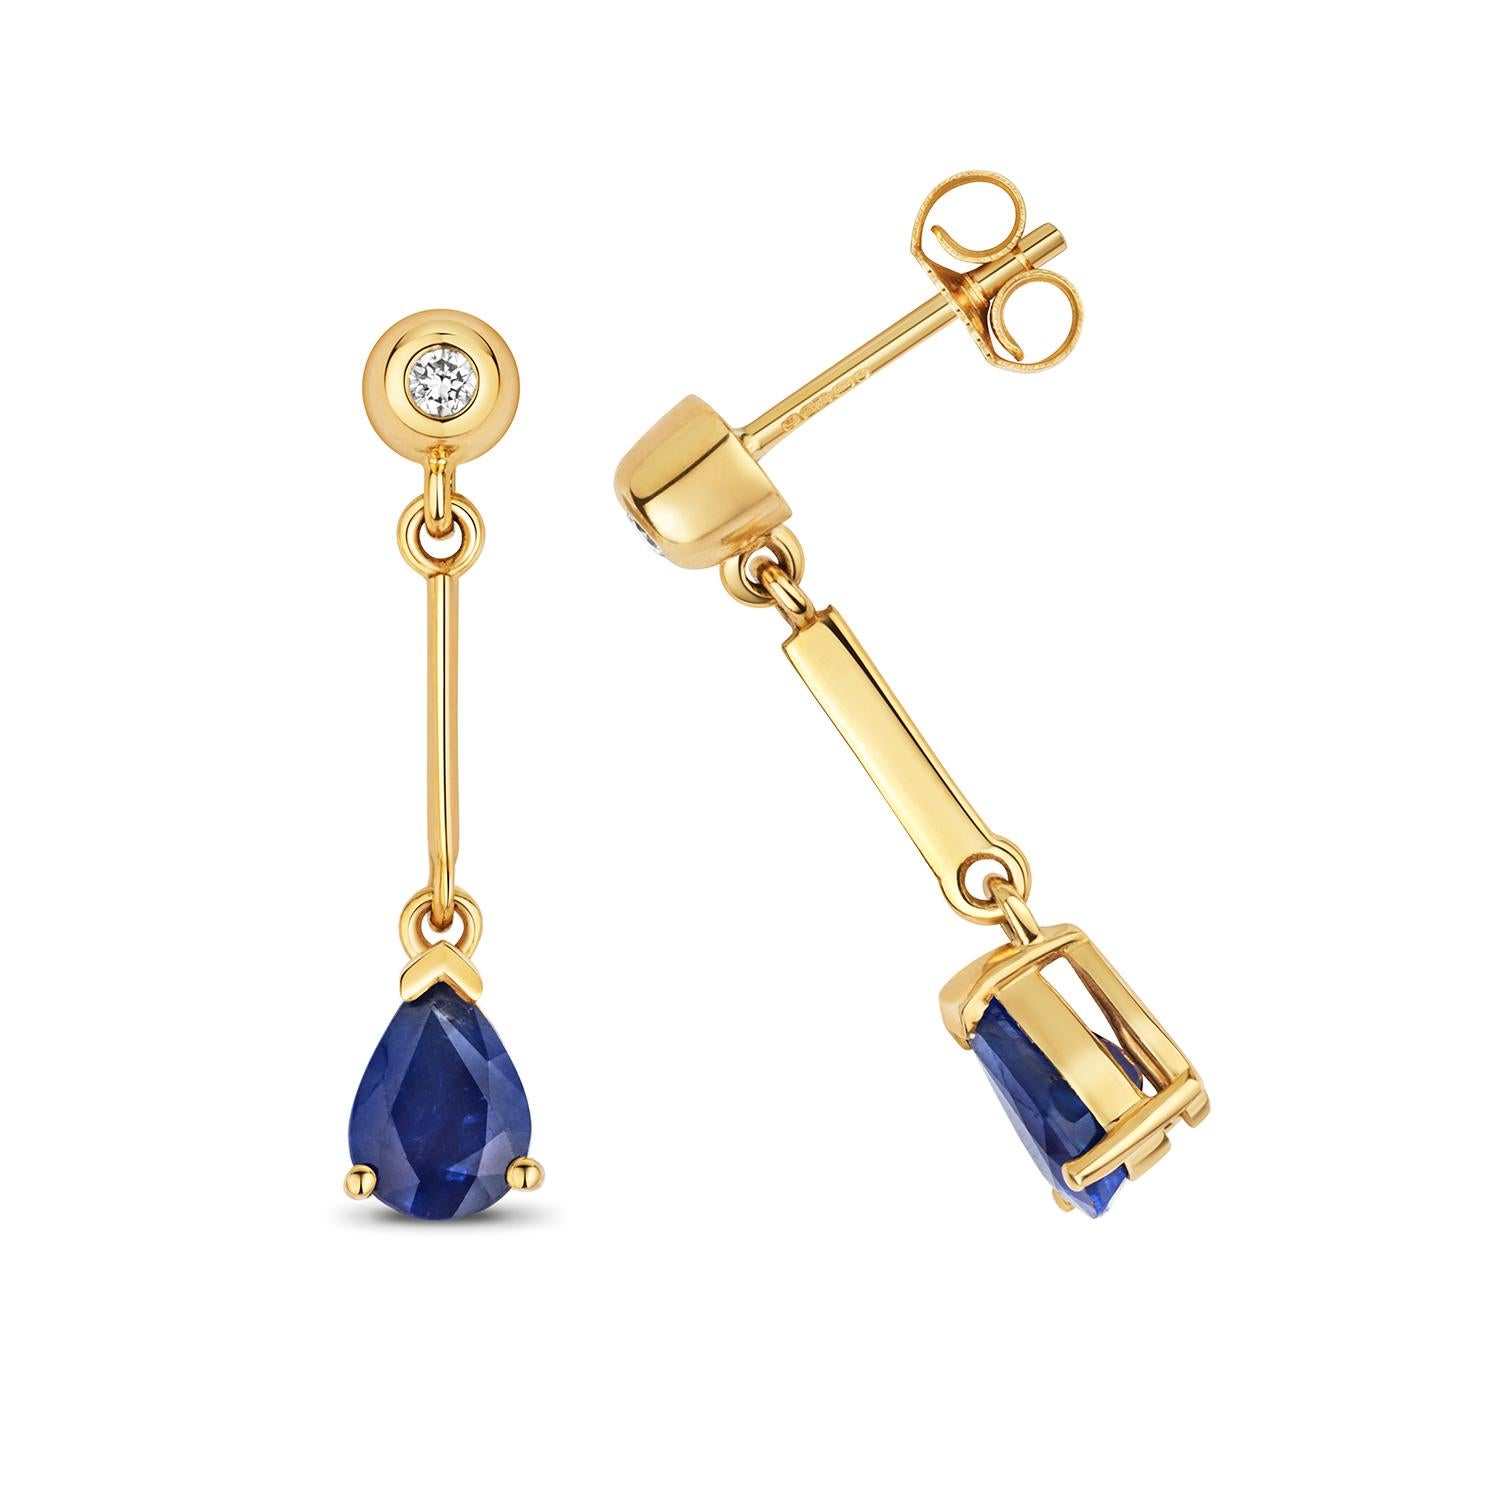 SAPPHIRE DROP EARRINGS PEAR

9CT Y/G PR/7X5 SAP

Weight: 1.9g

Number Of Stones:2

Total Carates:1.700